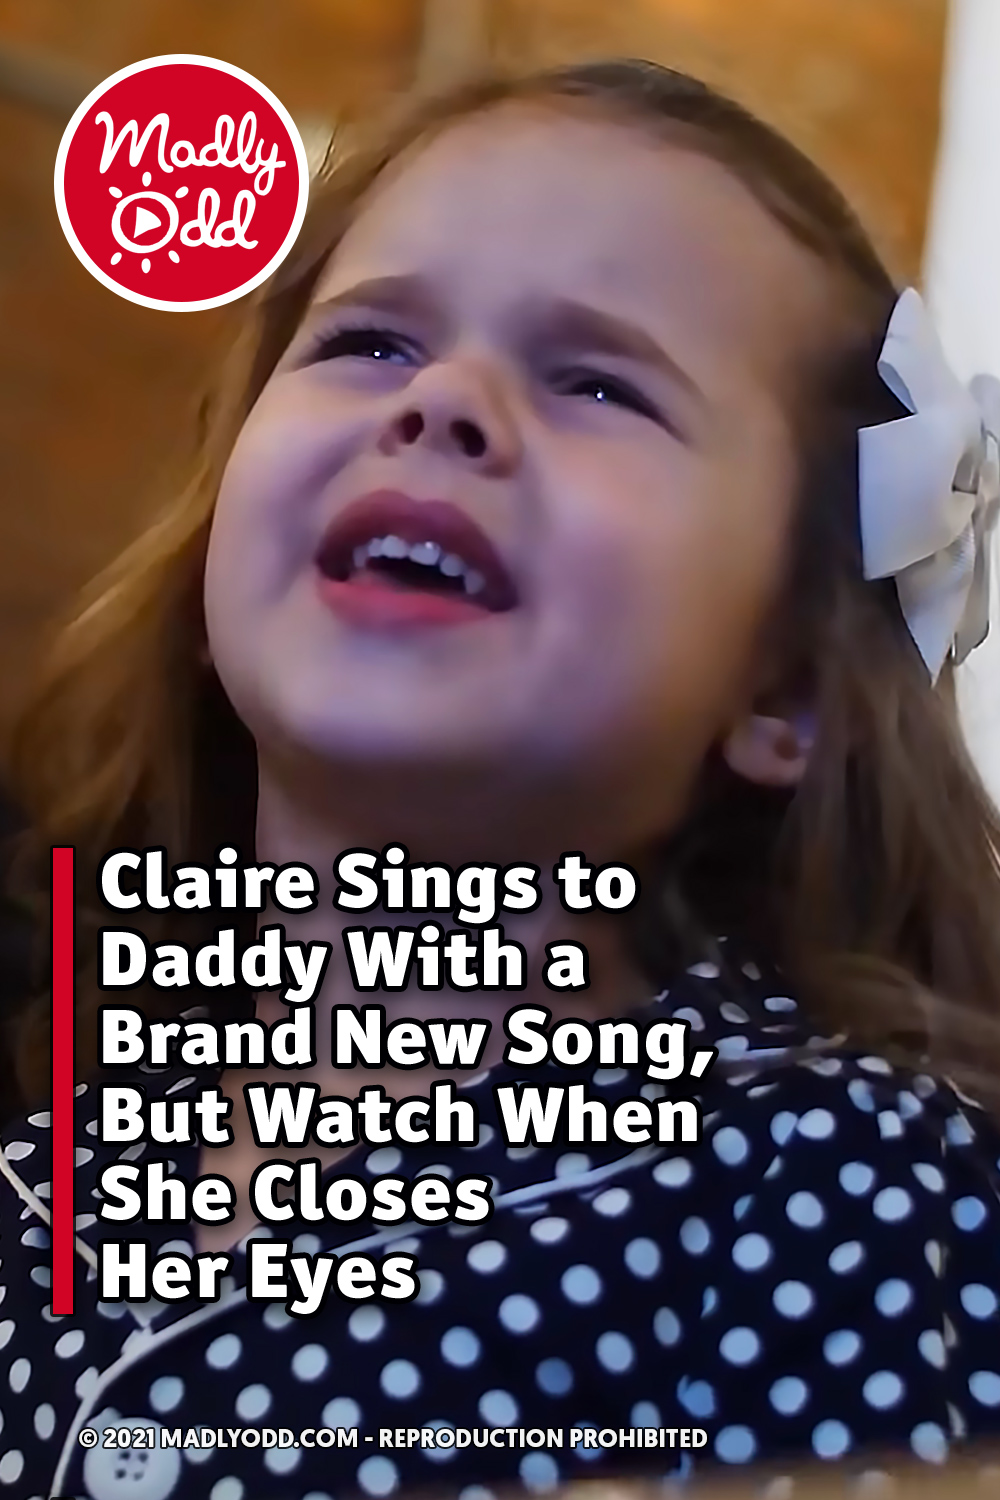 Claire Sings to Daddy With a Brand New Song, But Watch When She Closes Her Eyes